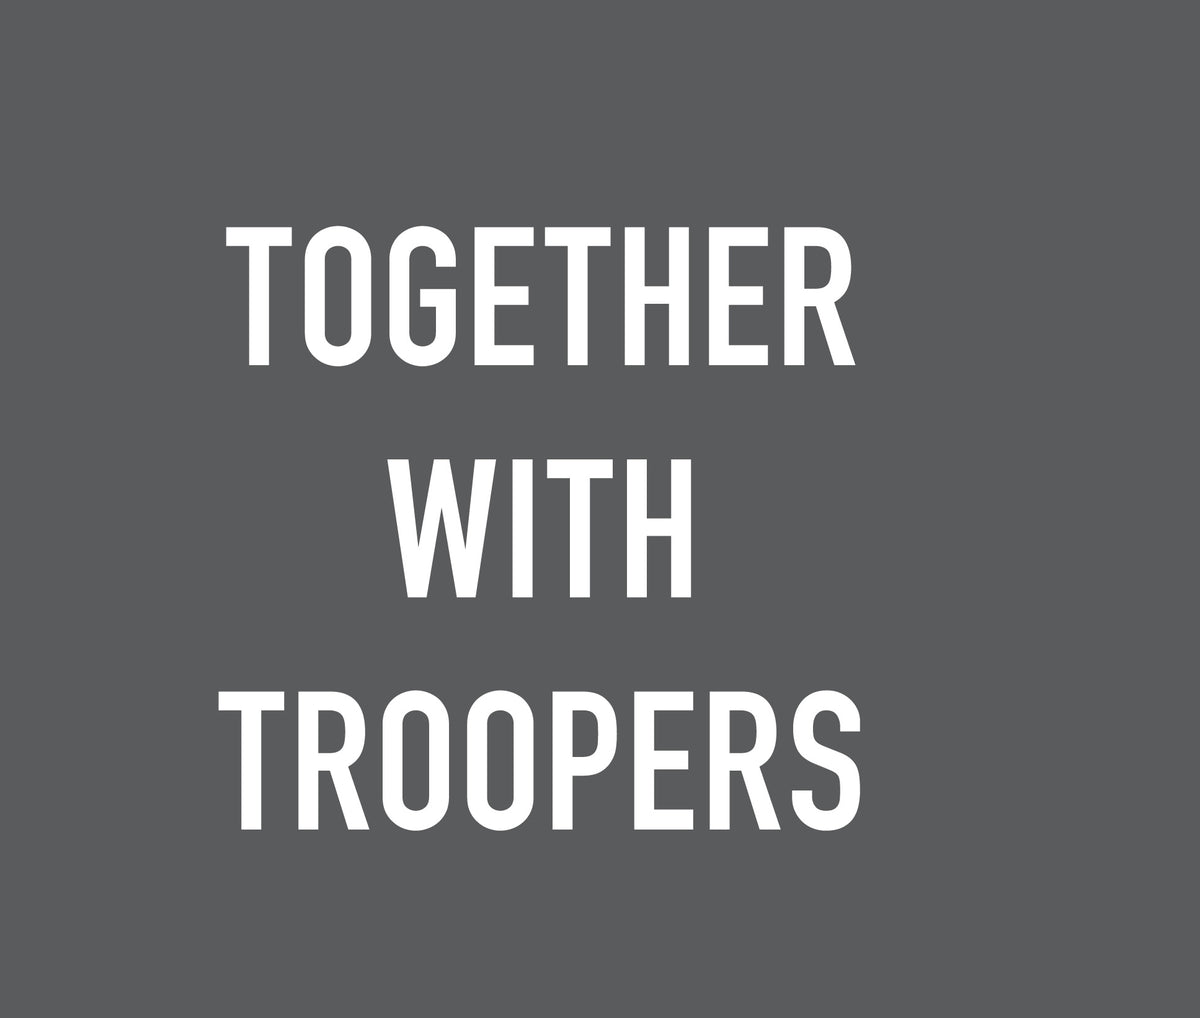 Together with Troopers